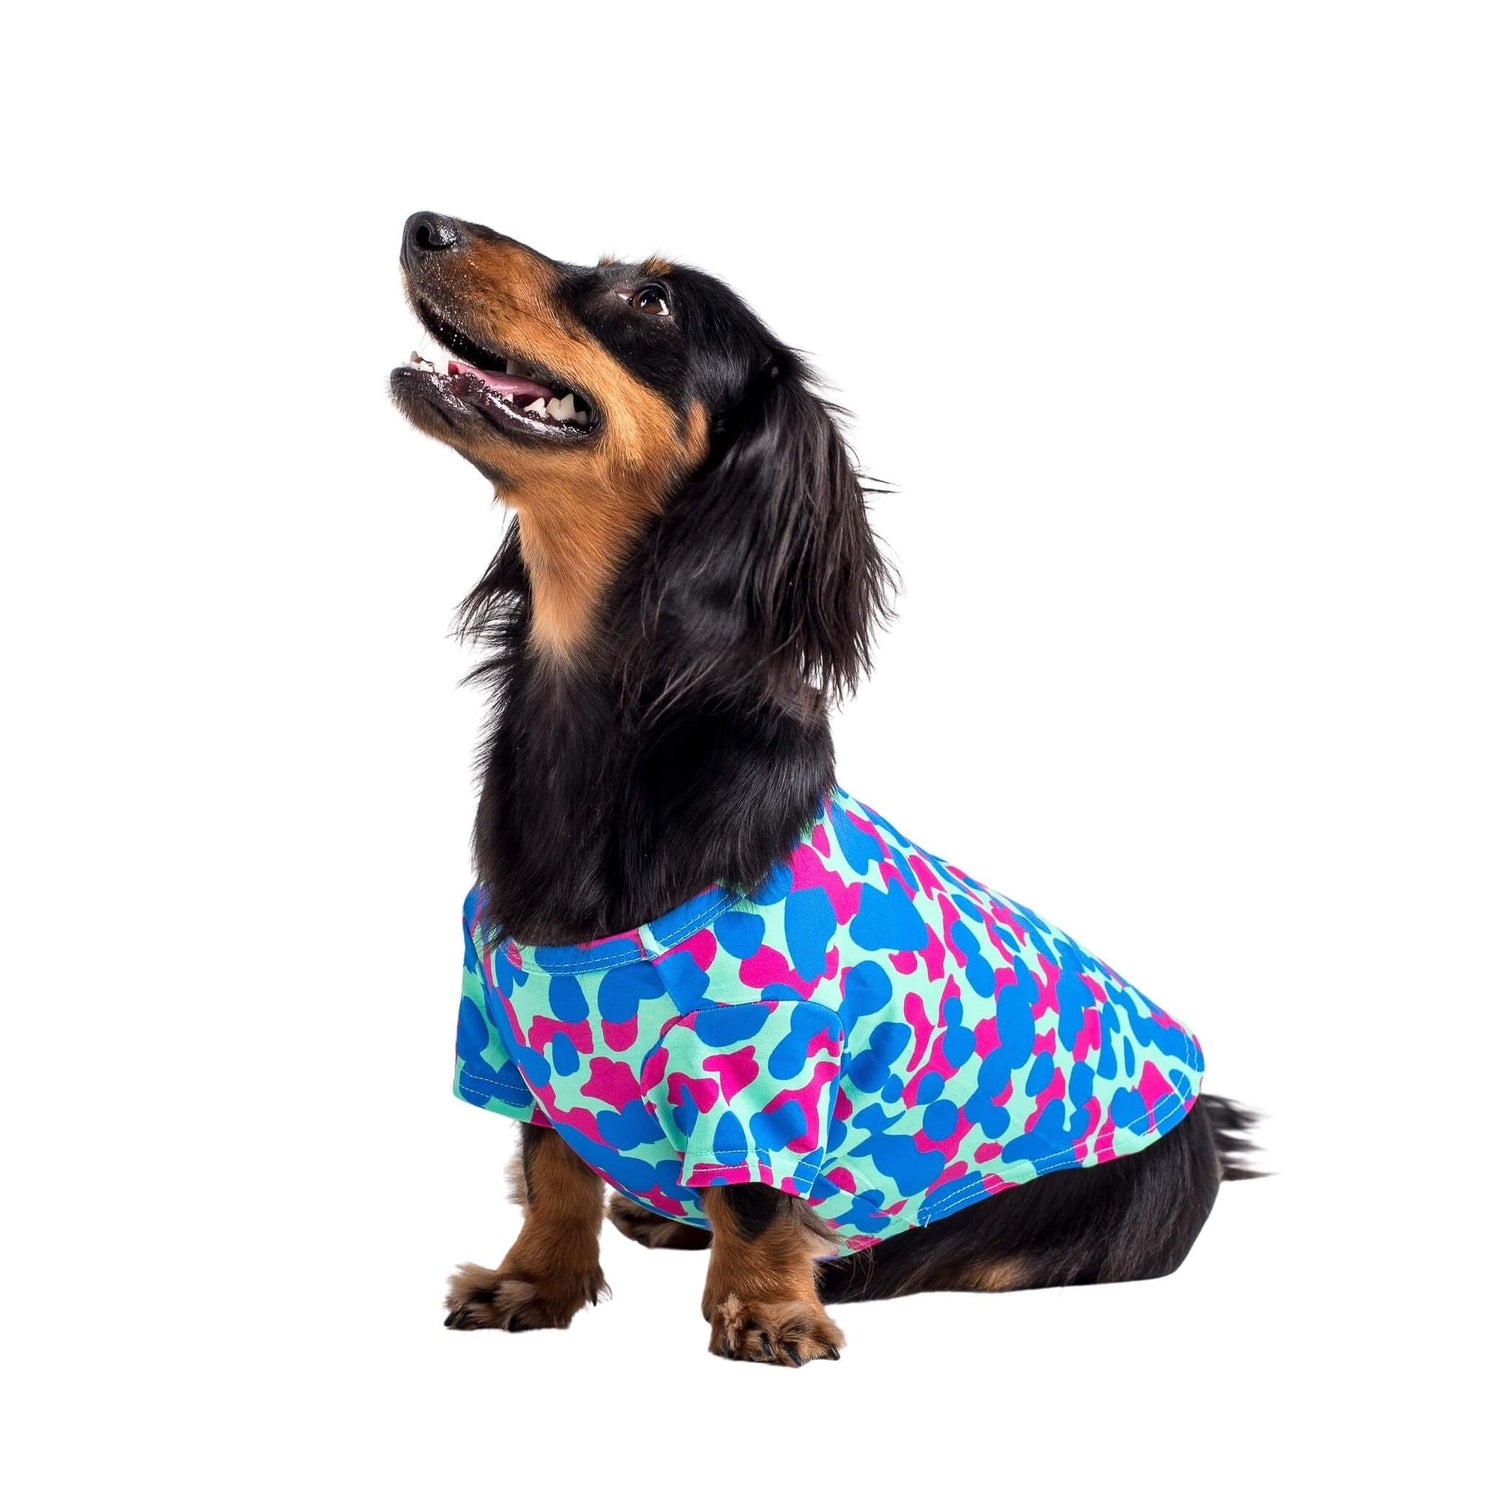 Ellie the Dachshund standing side on to the camera. It is wearing a Painted on dog shirt made by Vibrant Hound. The print is pink and blue blobs.